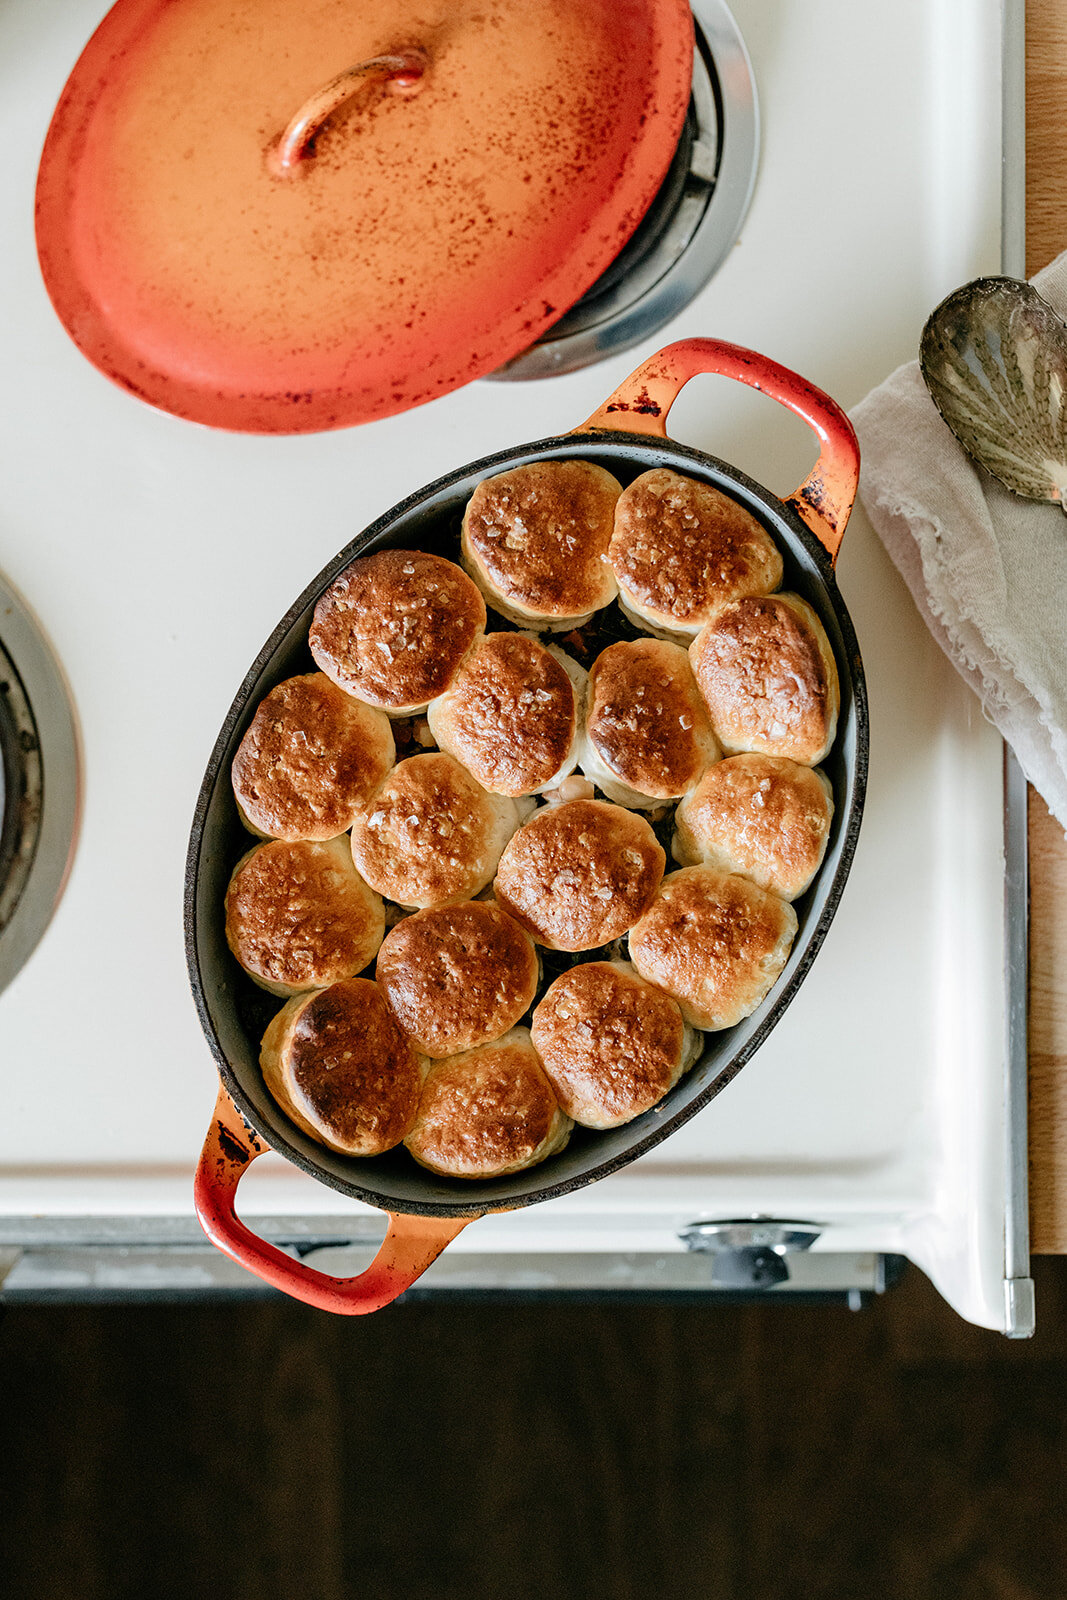 Girl Meets Farm by Molly Yeh 5-Qt. Cast Iron Dutch Oven - Macy's